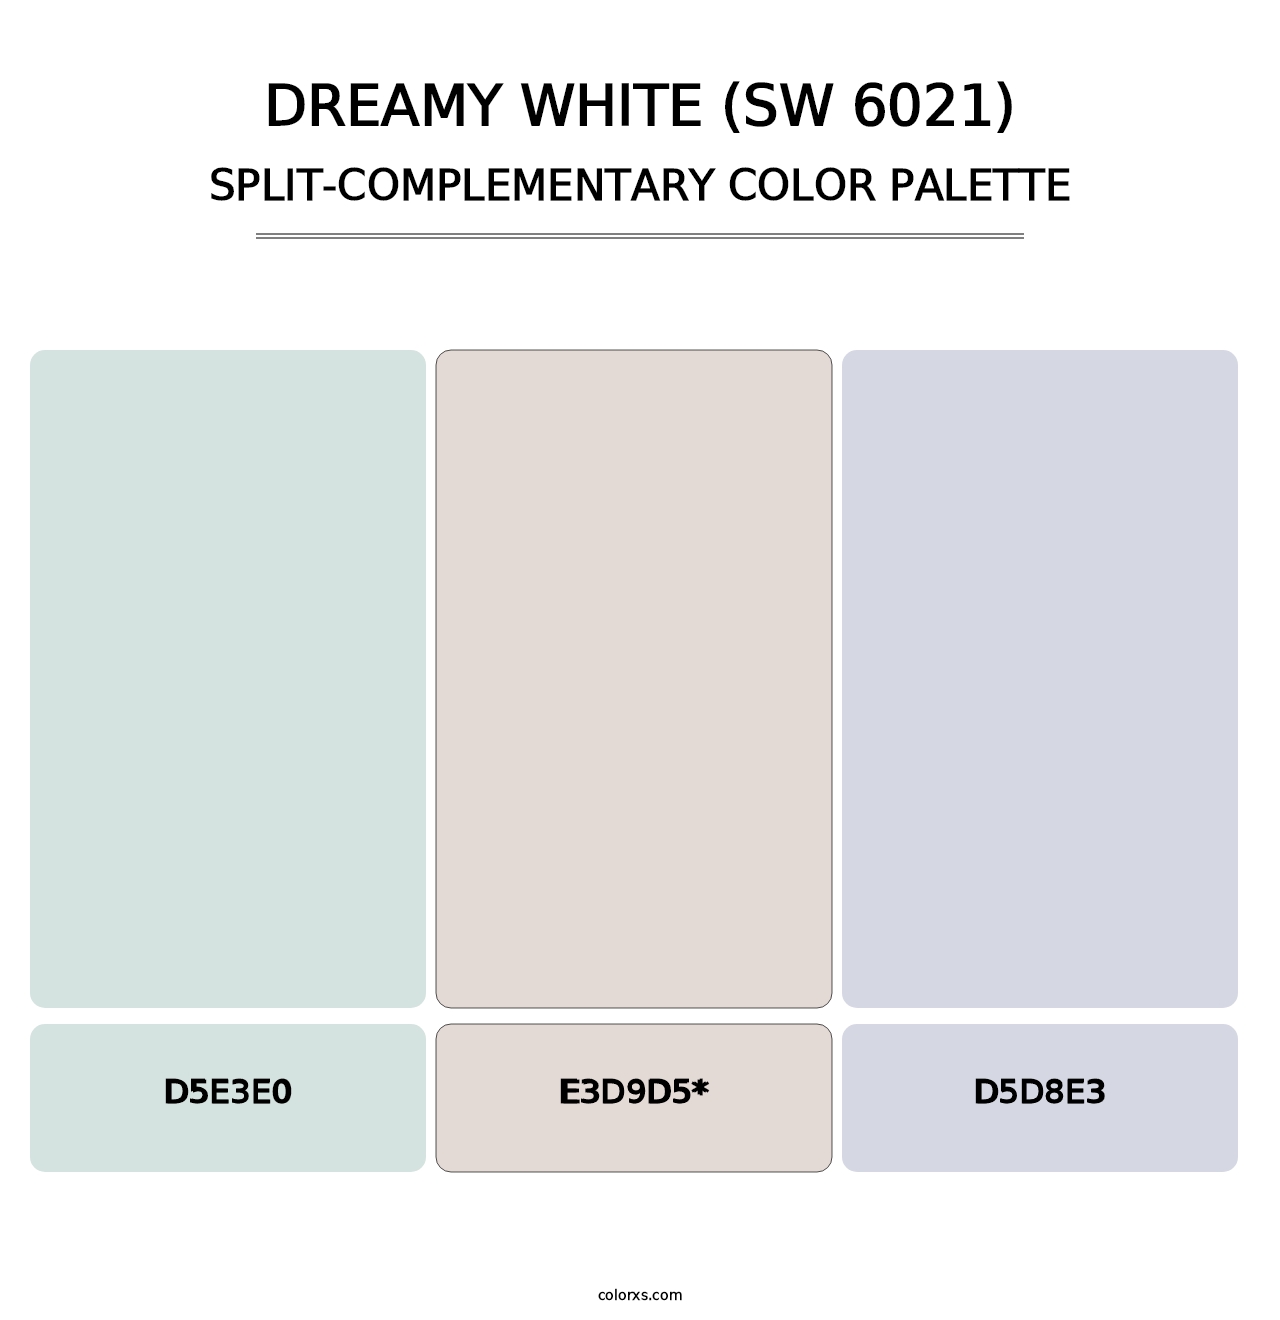 Dreamy White (SW 6021) - Split-Complementary Color Palette